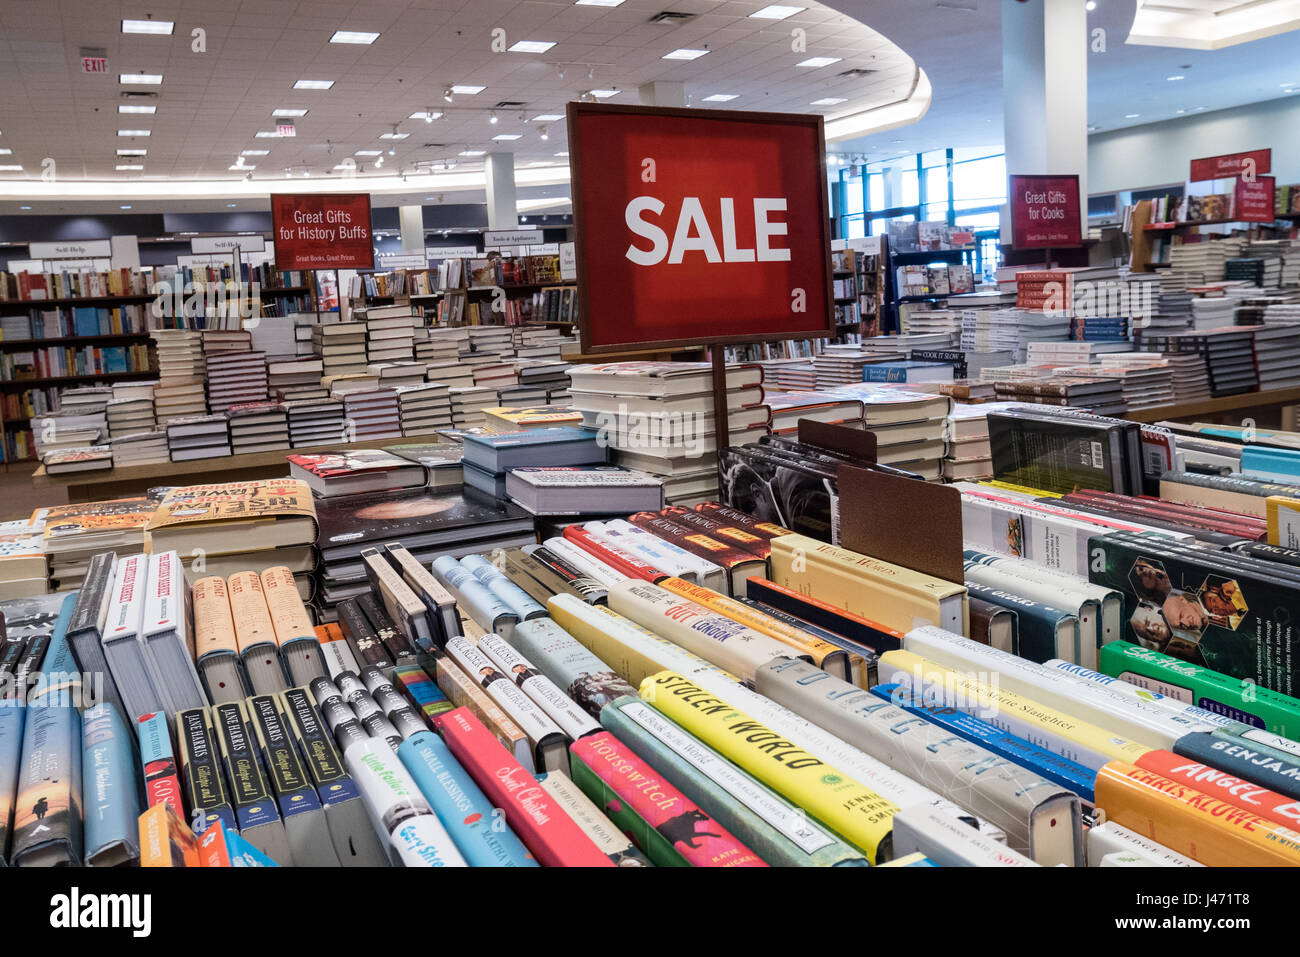 Sale sign at a book store Stock Photo